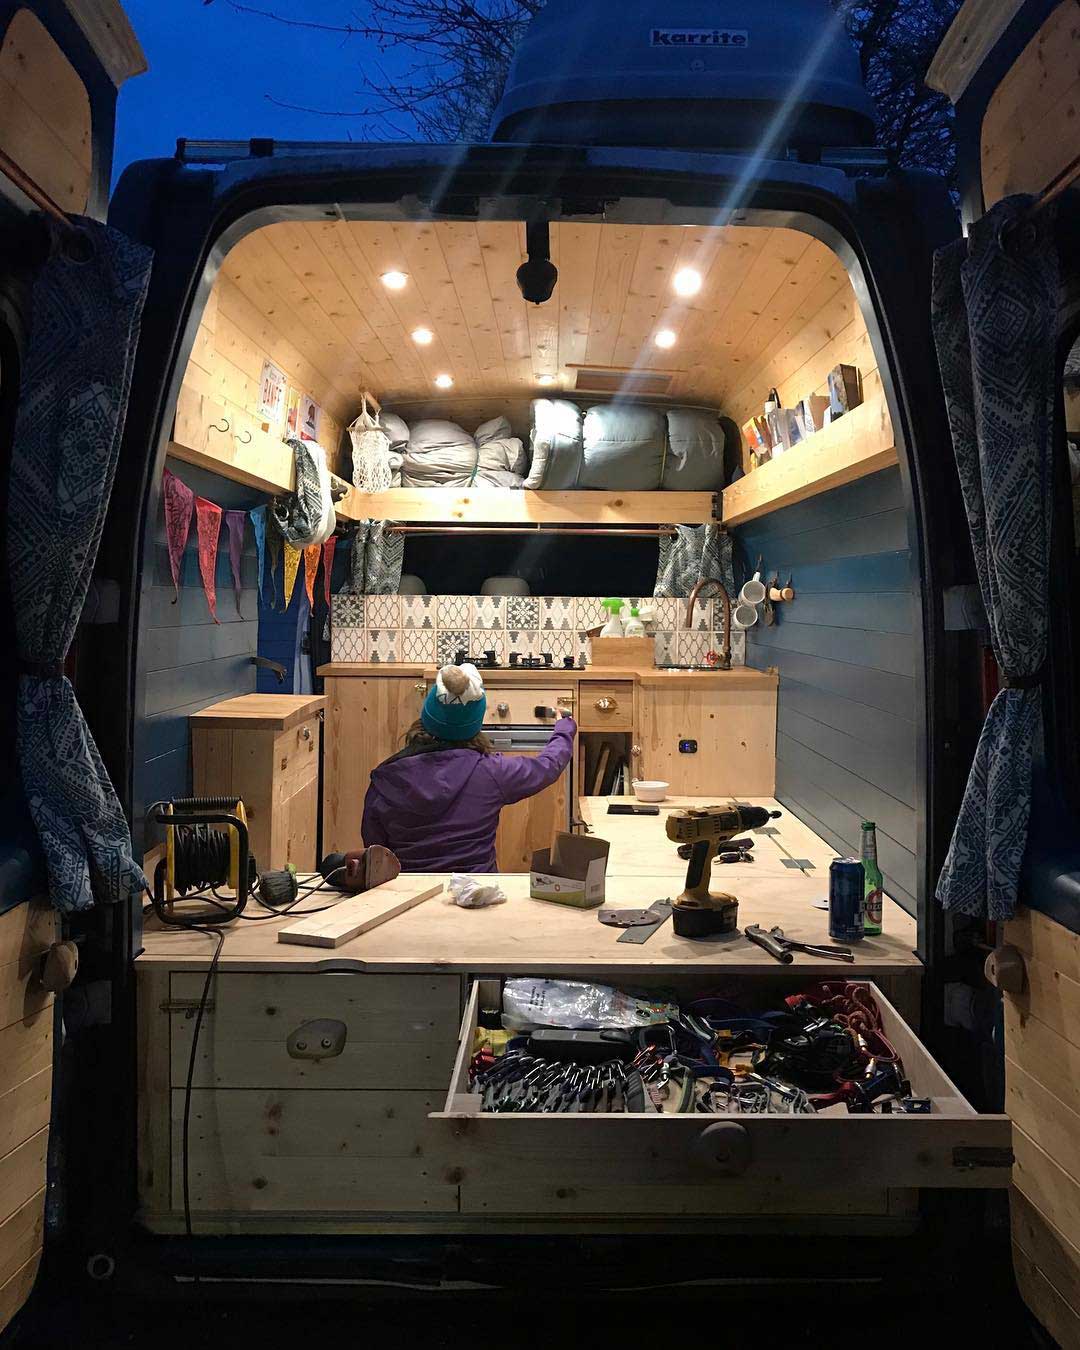 Installing electricity in a campervan